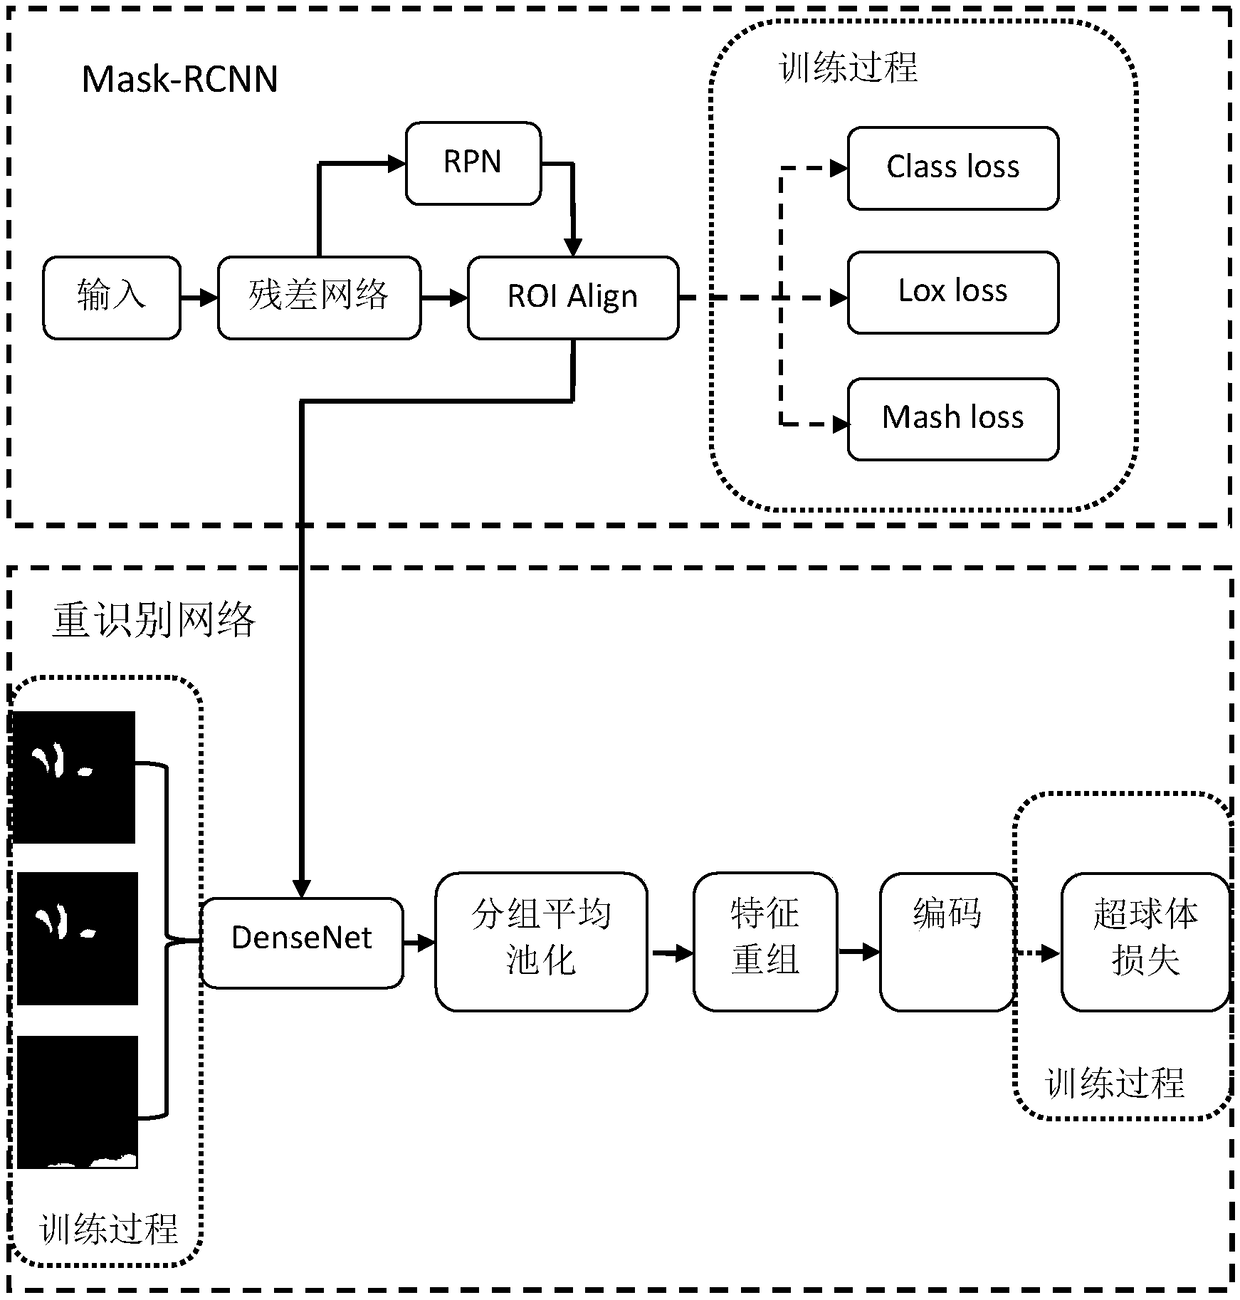 Target re-identification method based on hypersphere embedding in densely connected convolution networks